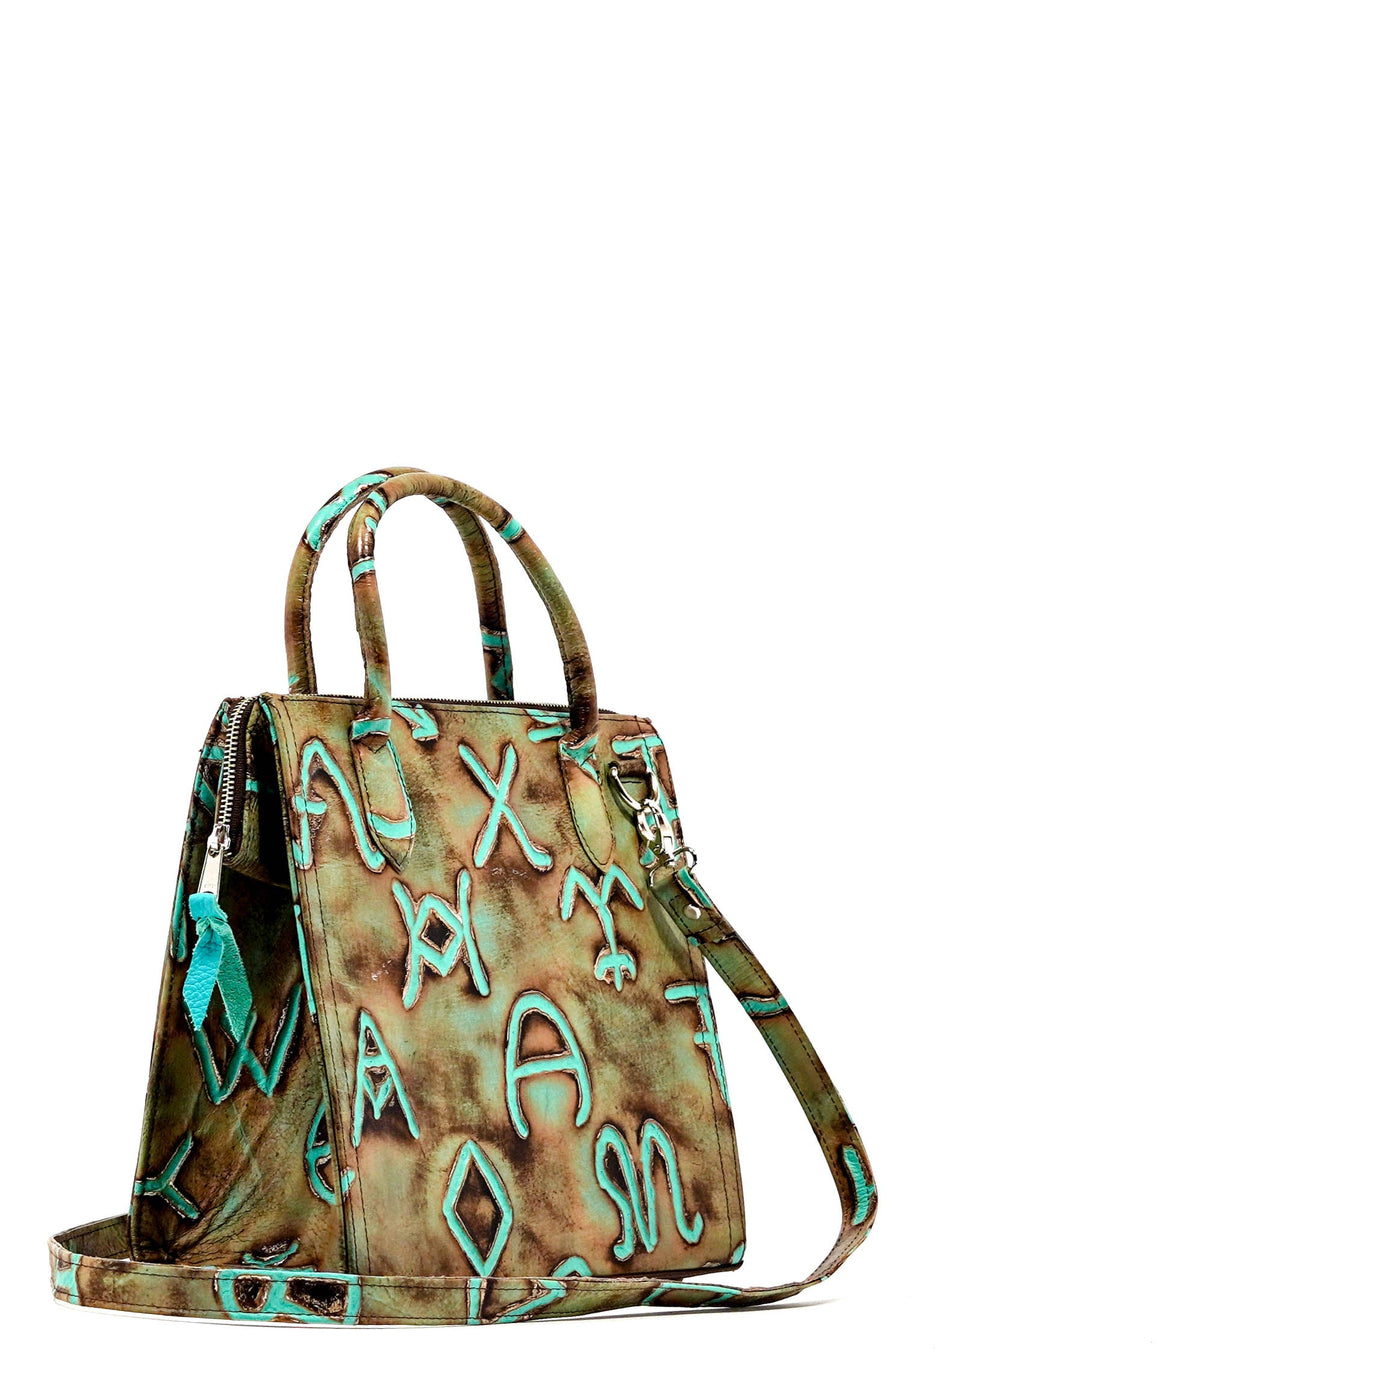 The Opry - All Embossed w/ Turquoise Brands-The Opry-Western-Cowhide-Bags-Handmade-Products-Gifts-Dancing Cactus Designs